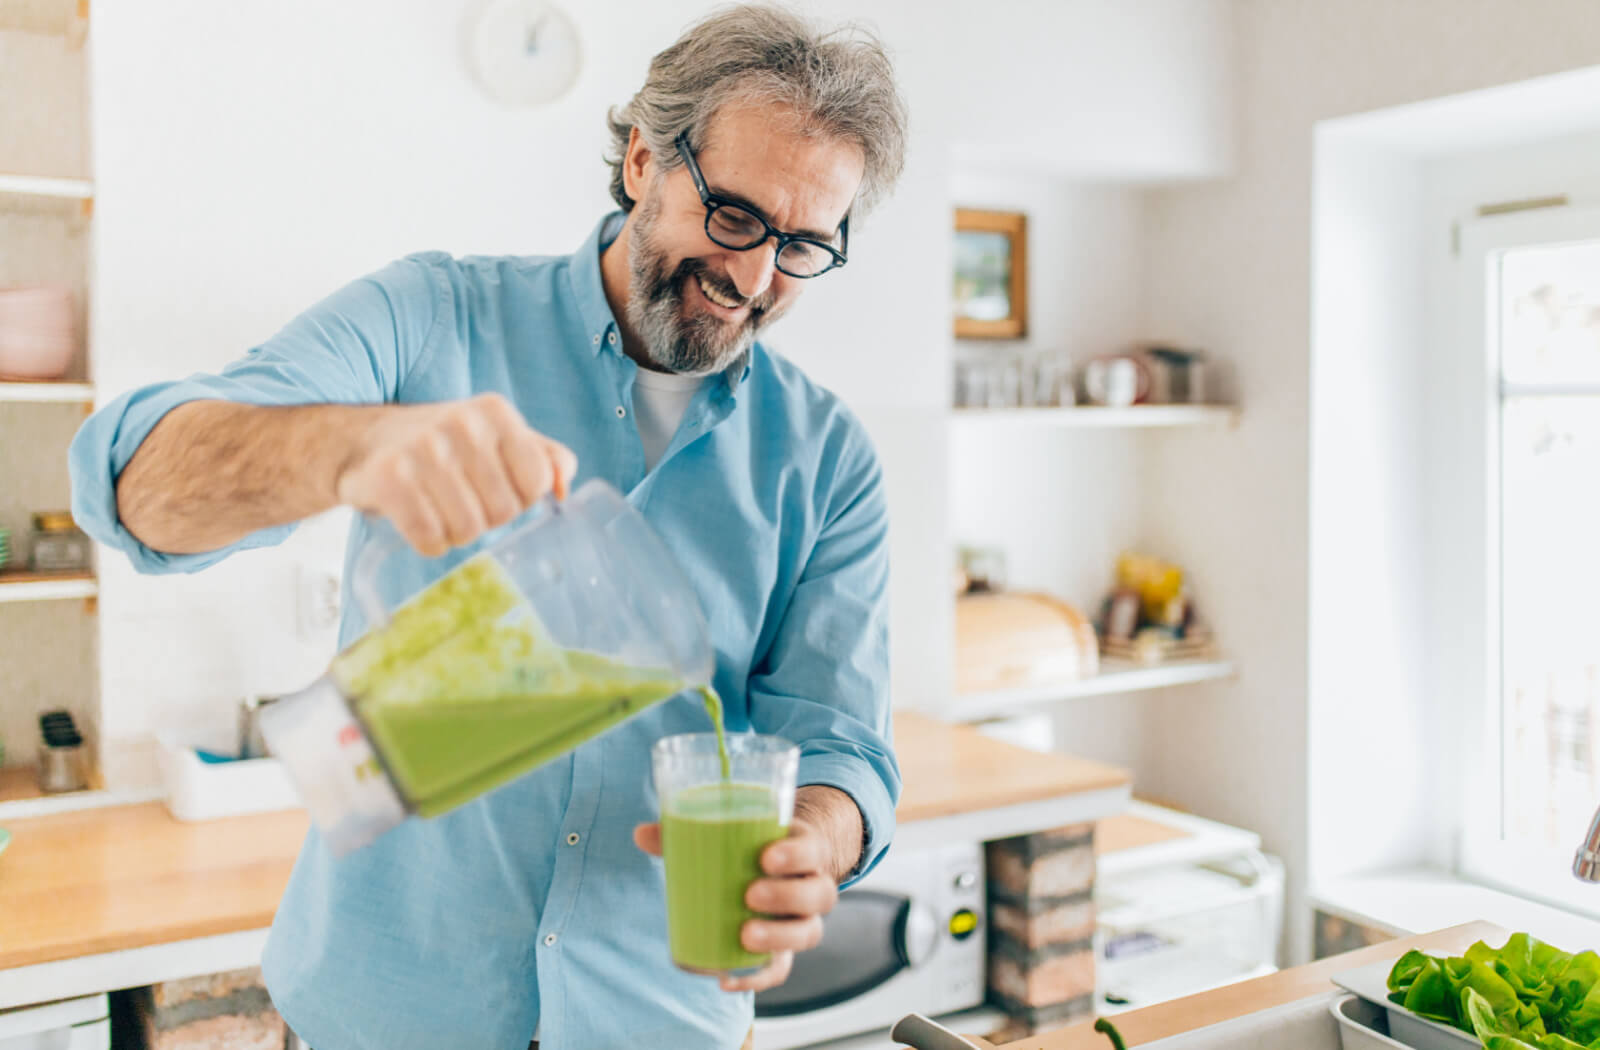 An older adult man pouring a freshly made smoothie from a blender to his glass.